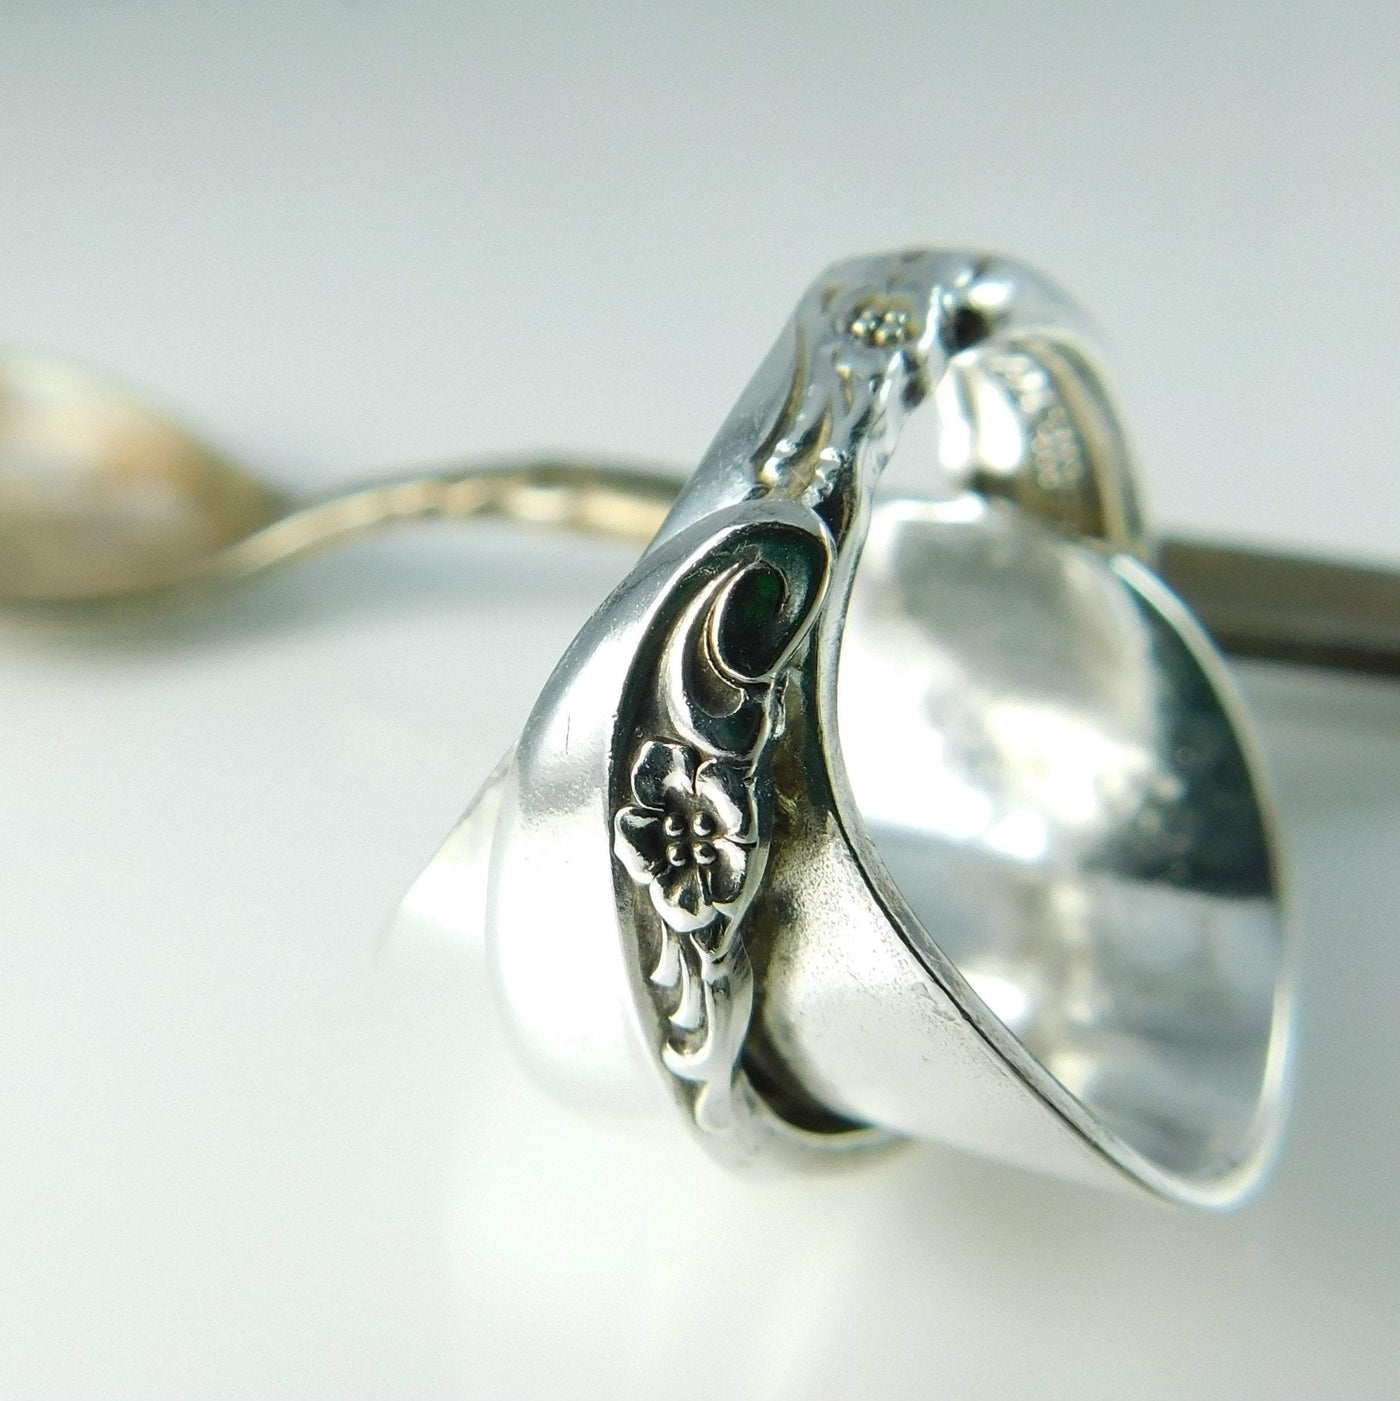 Whole Spoon Rings